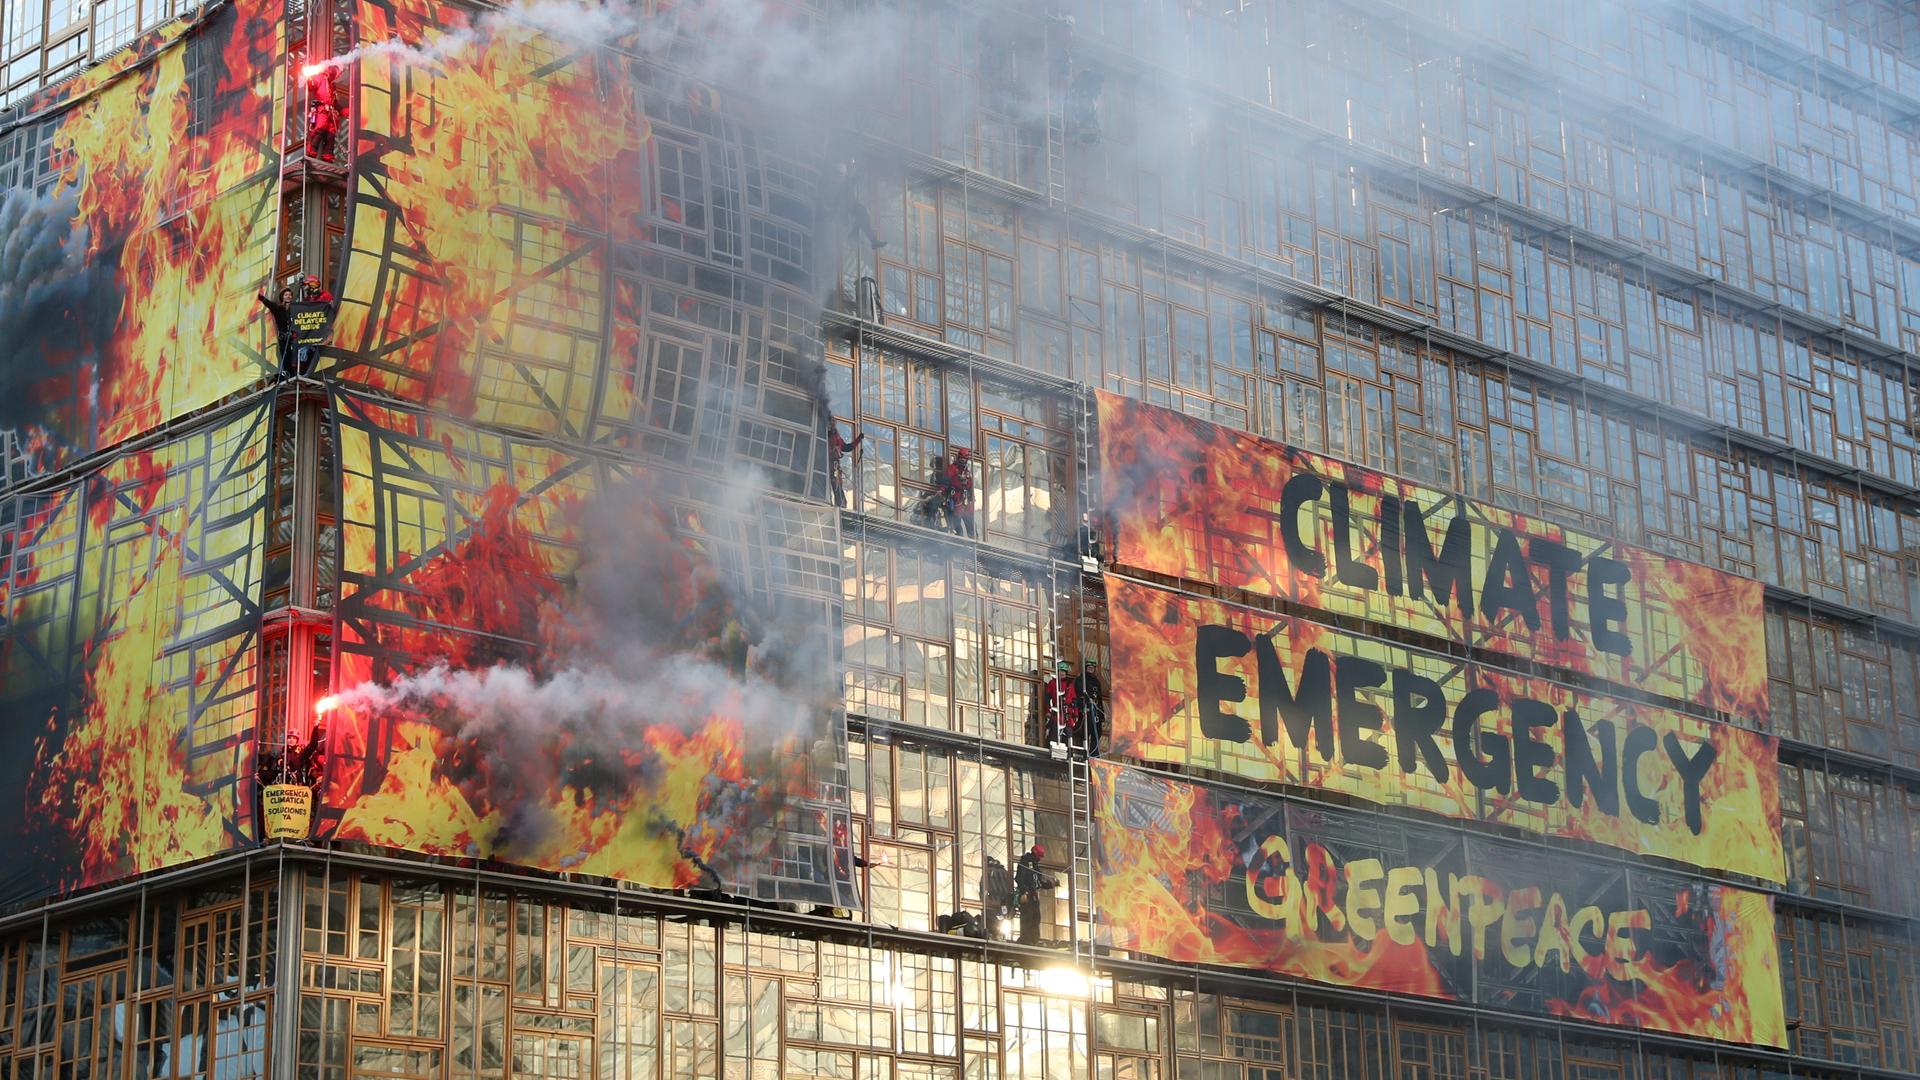 Building reads "climate emergency" with flares of red and orange hues on the front of the building